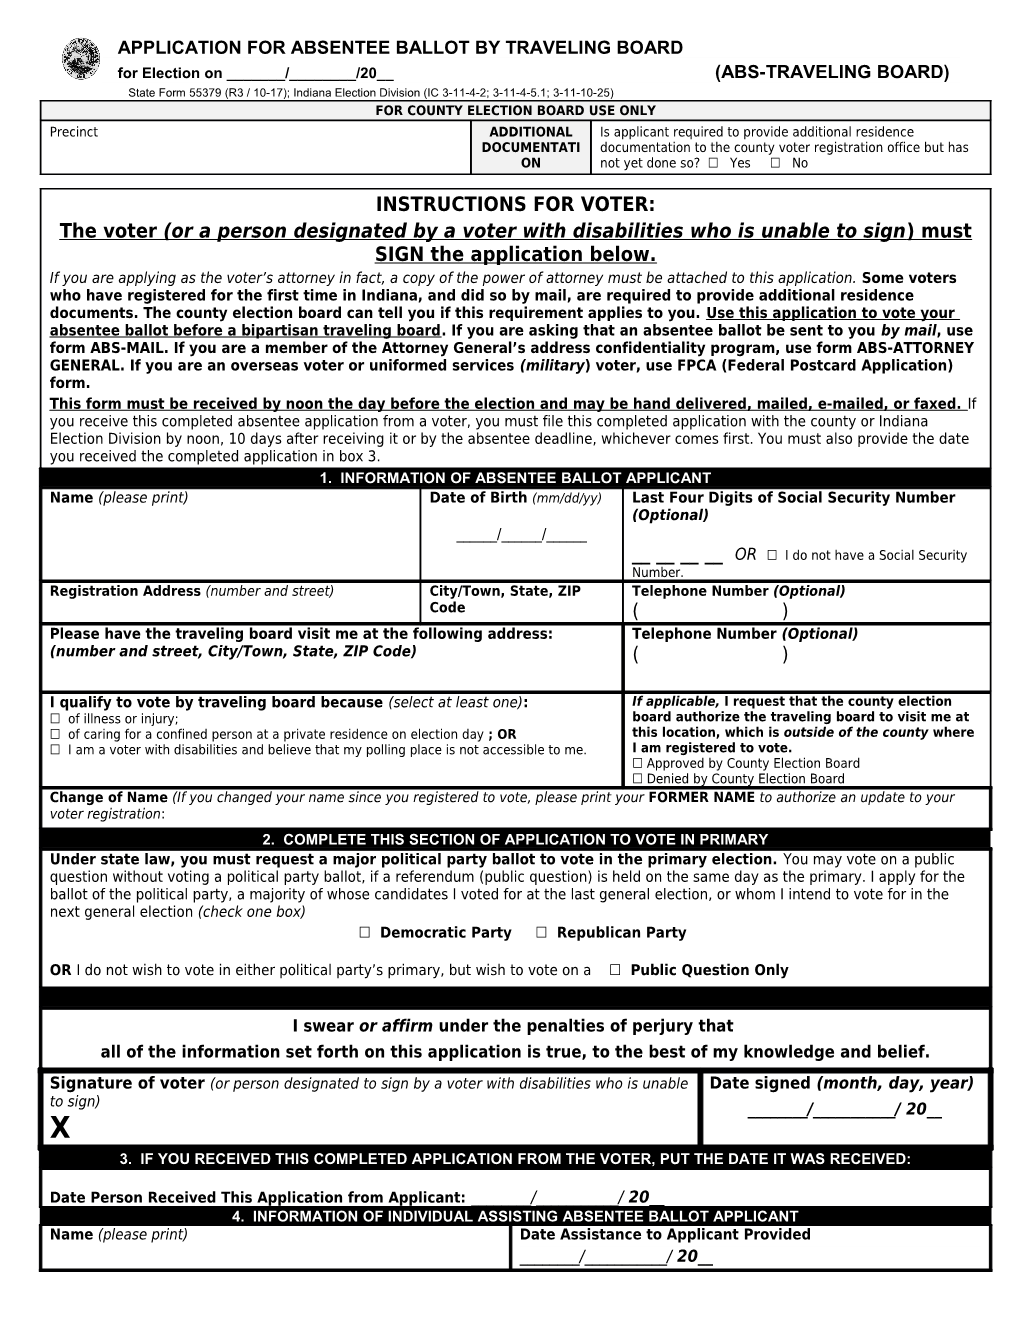 Application for Absentee Ballot by Traveling Board